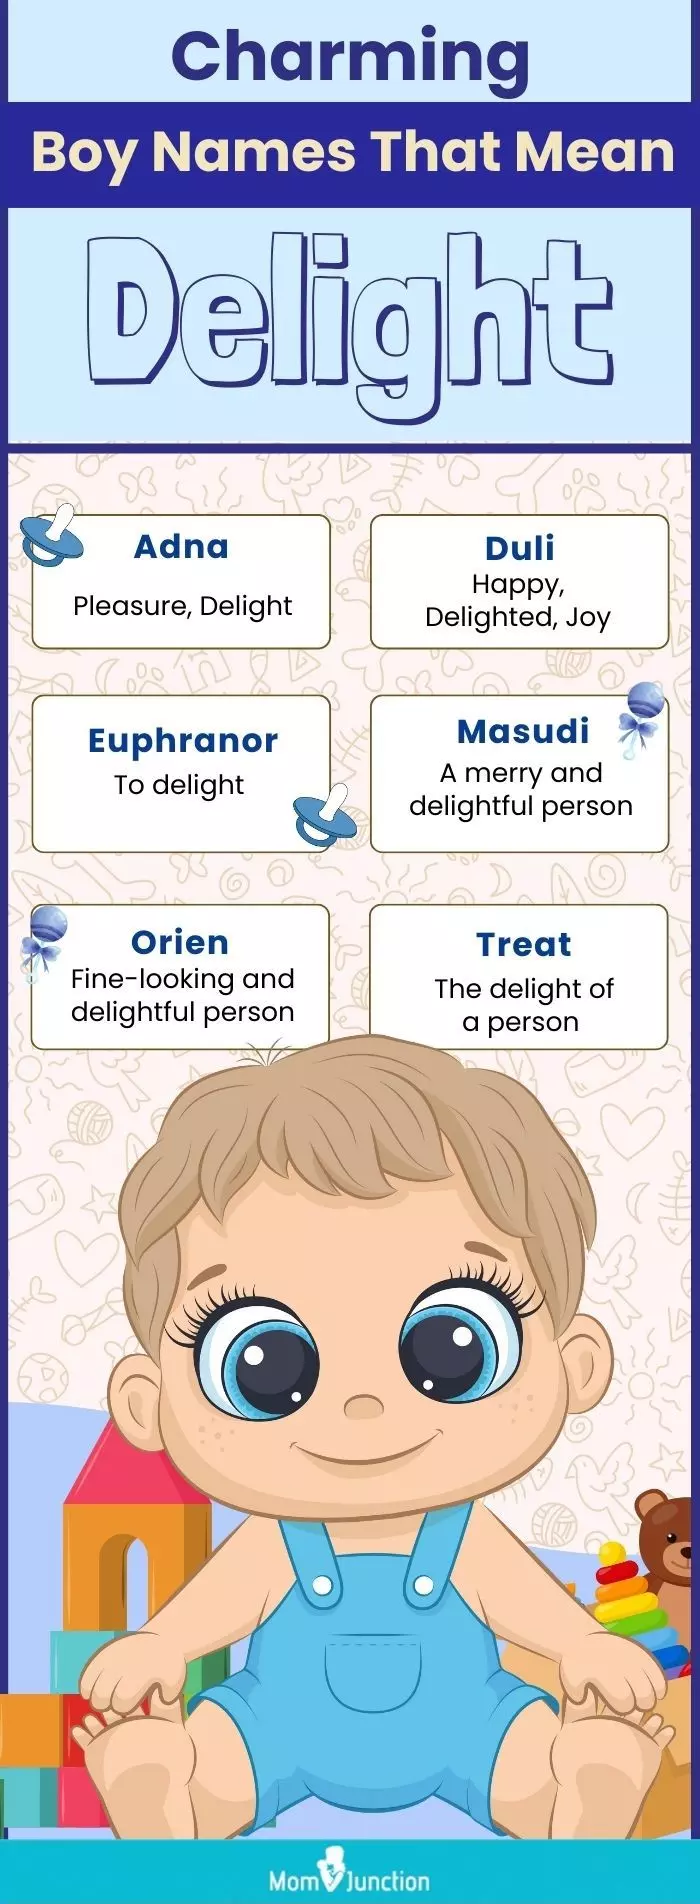 Charming Boy Names That Mean Delight (infographic)